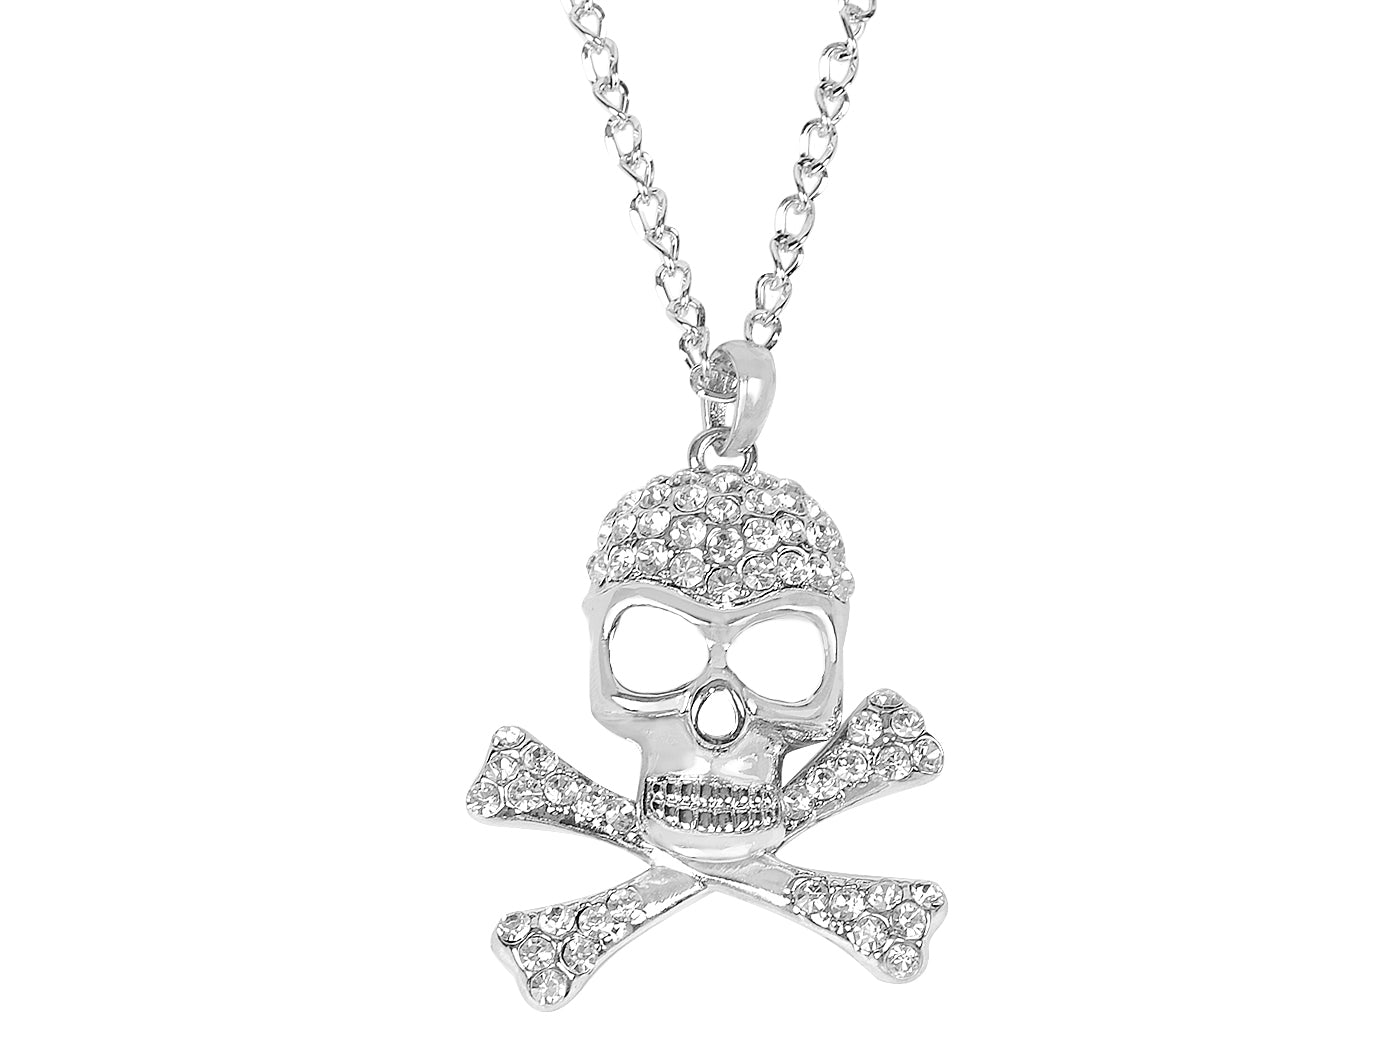 Skull Head Pirate Cut Out Halloween Pendant Necklace